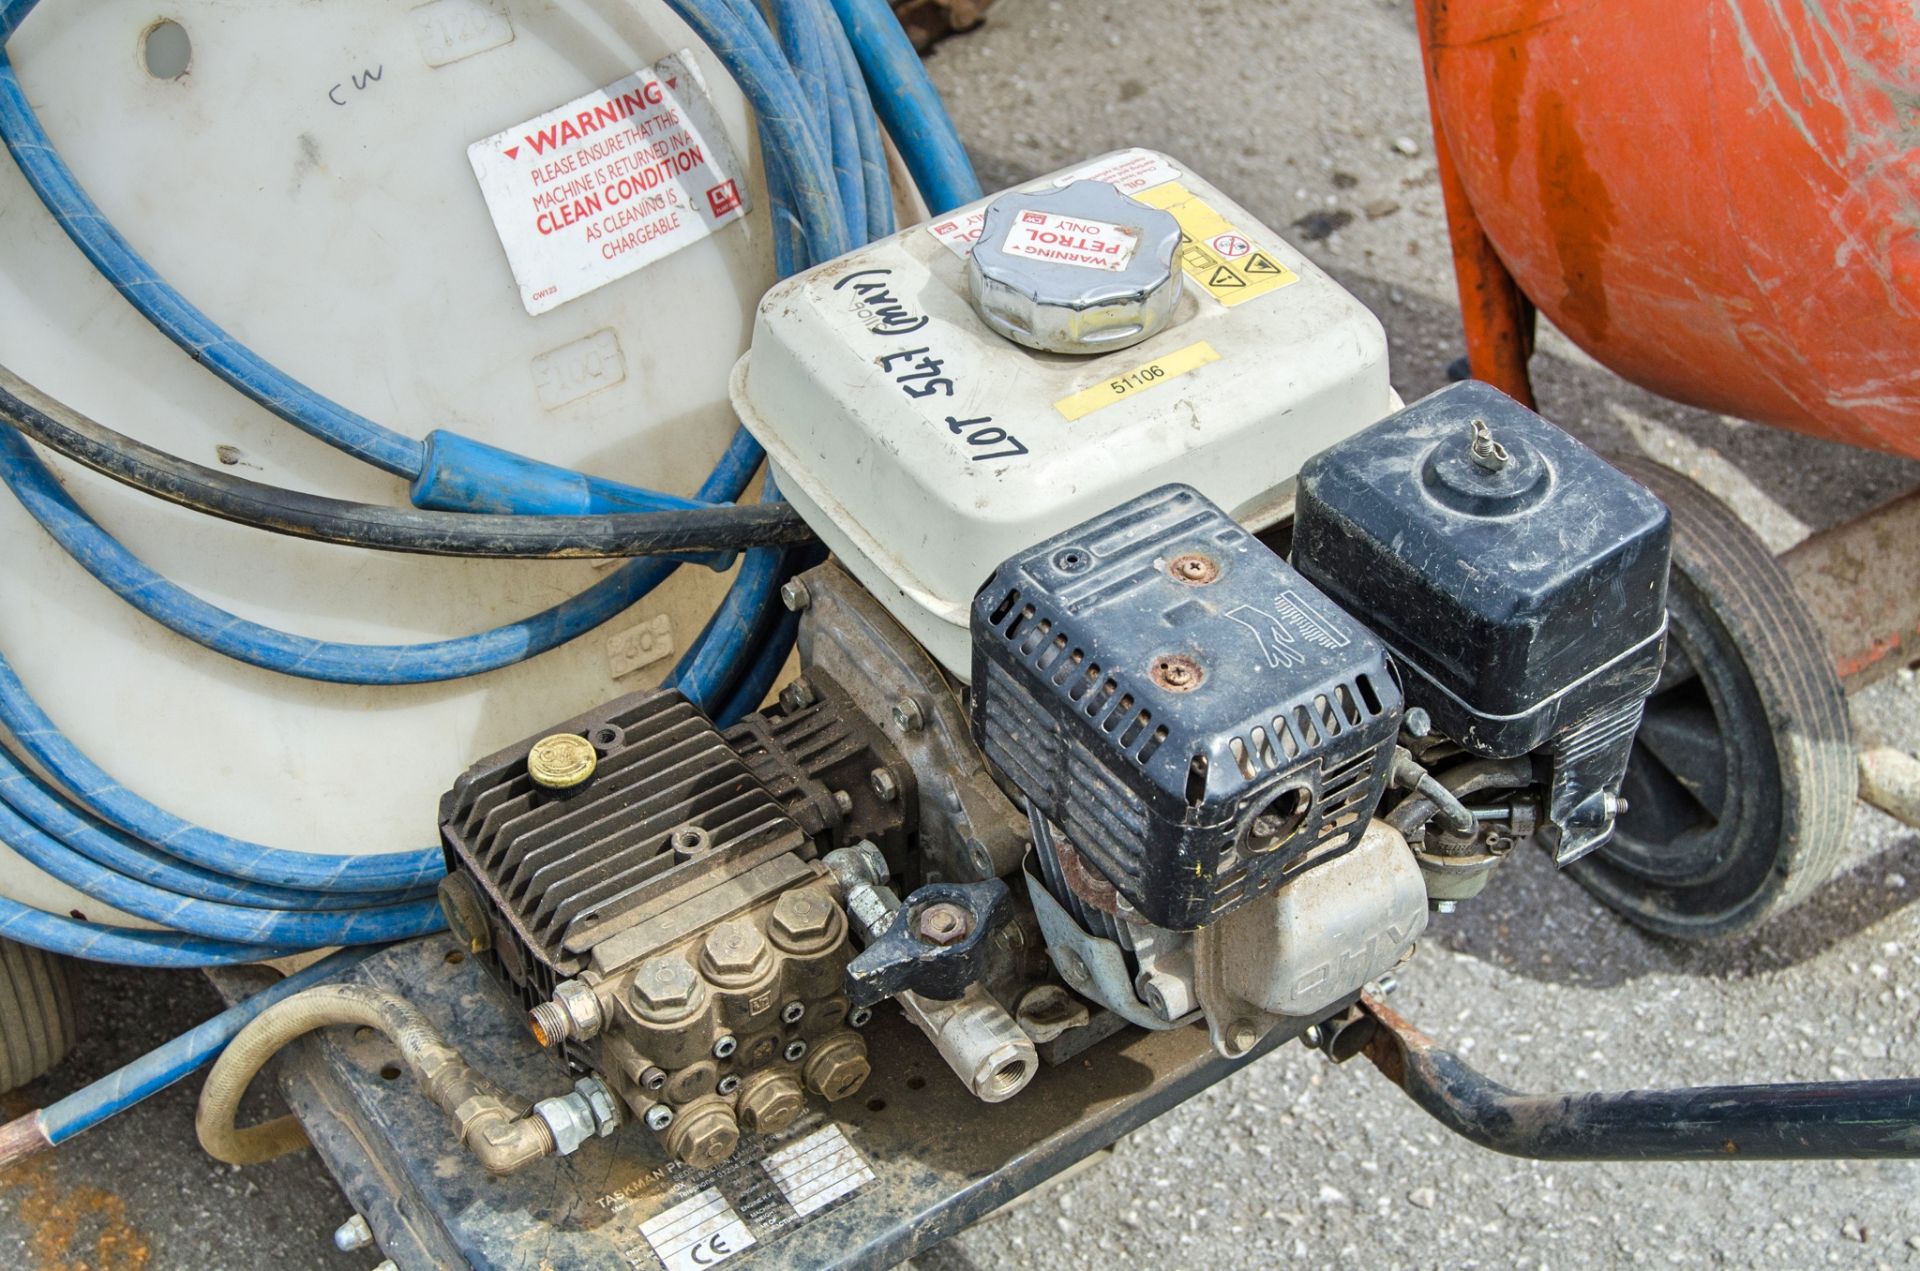 Taskman petrol driven pressure washer bowser c/w hose 51106 ** No lance & pull cord missing ** - Image 3 of 3